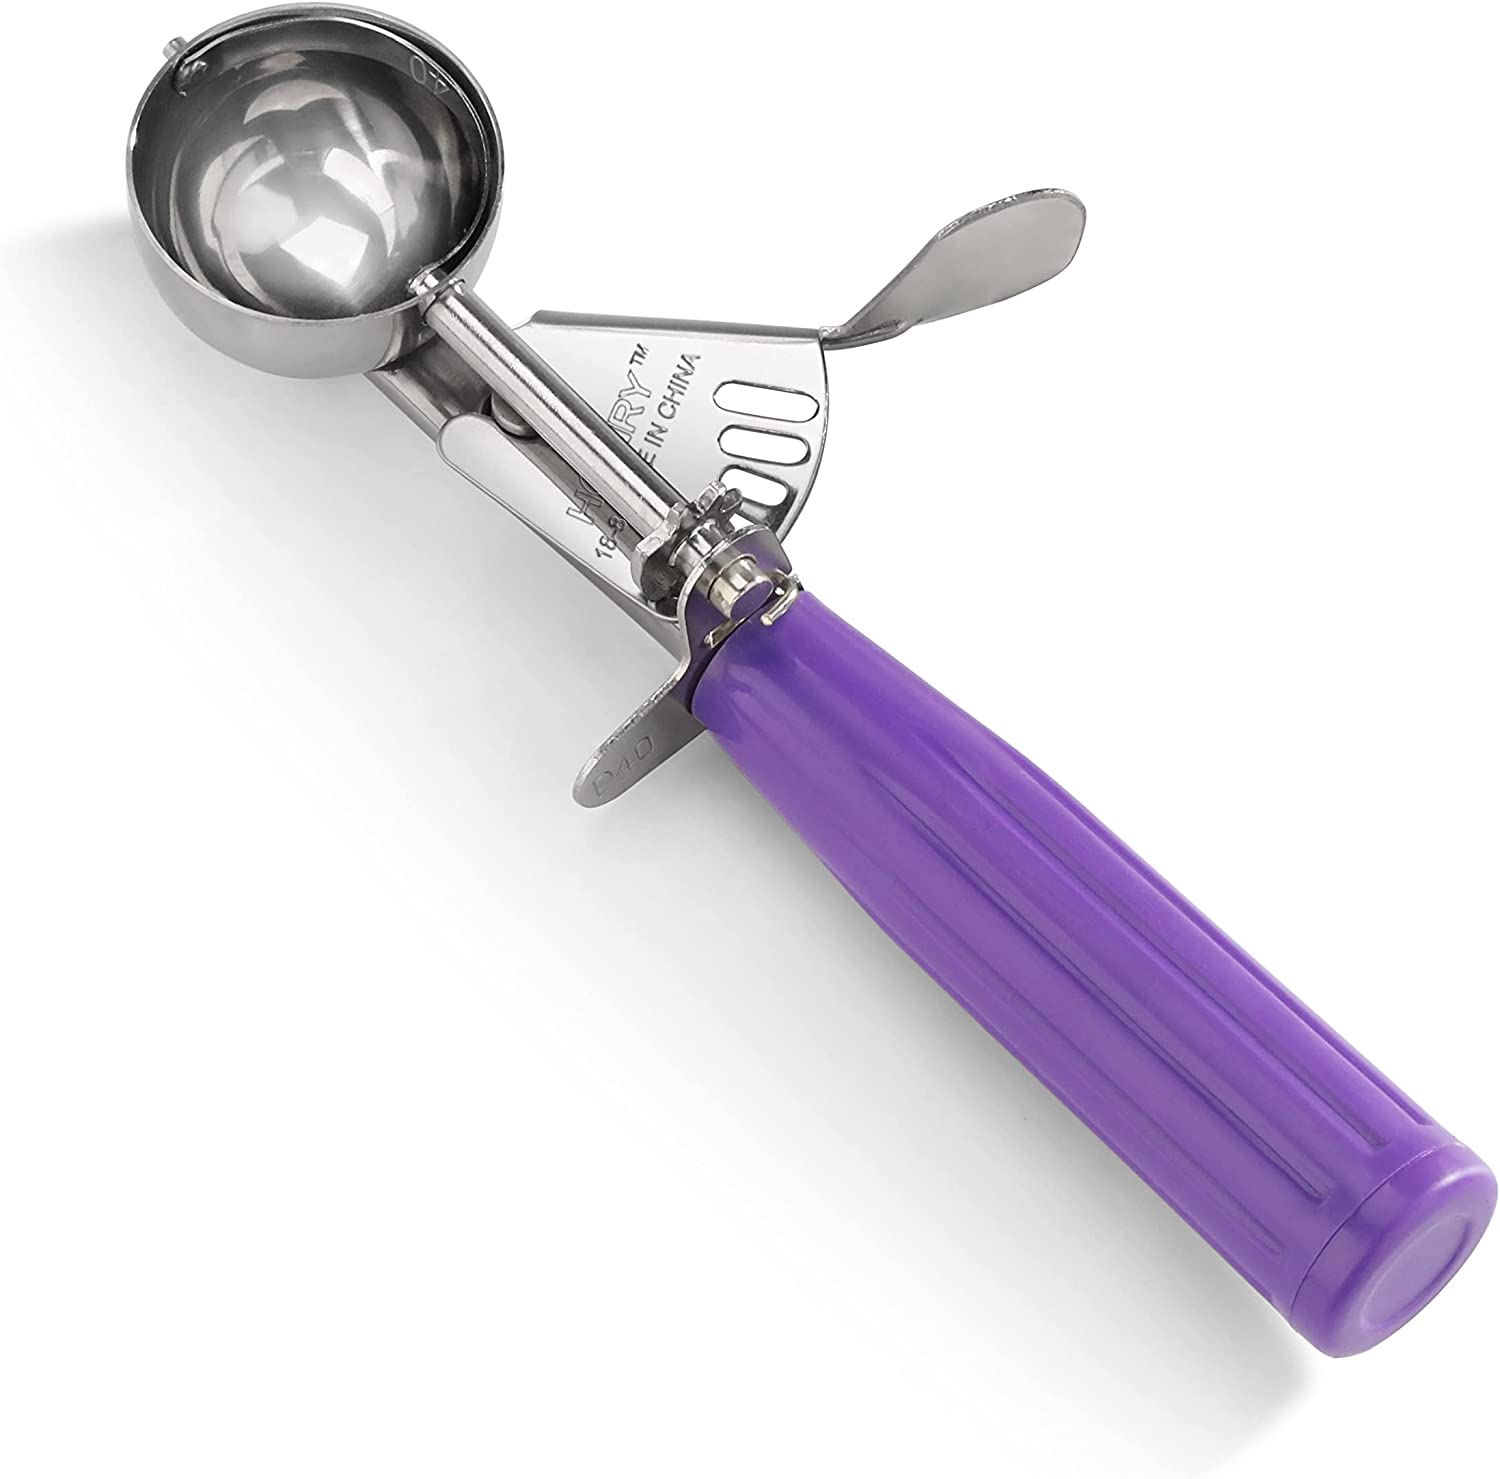 STAINLESS STEEL ICE CREAM SERVING SCOOPE 2523 at Rs 71/piece